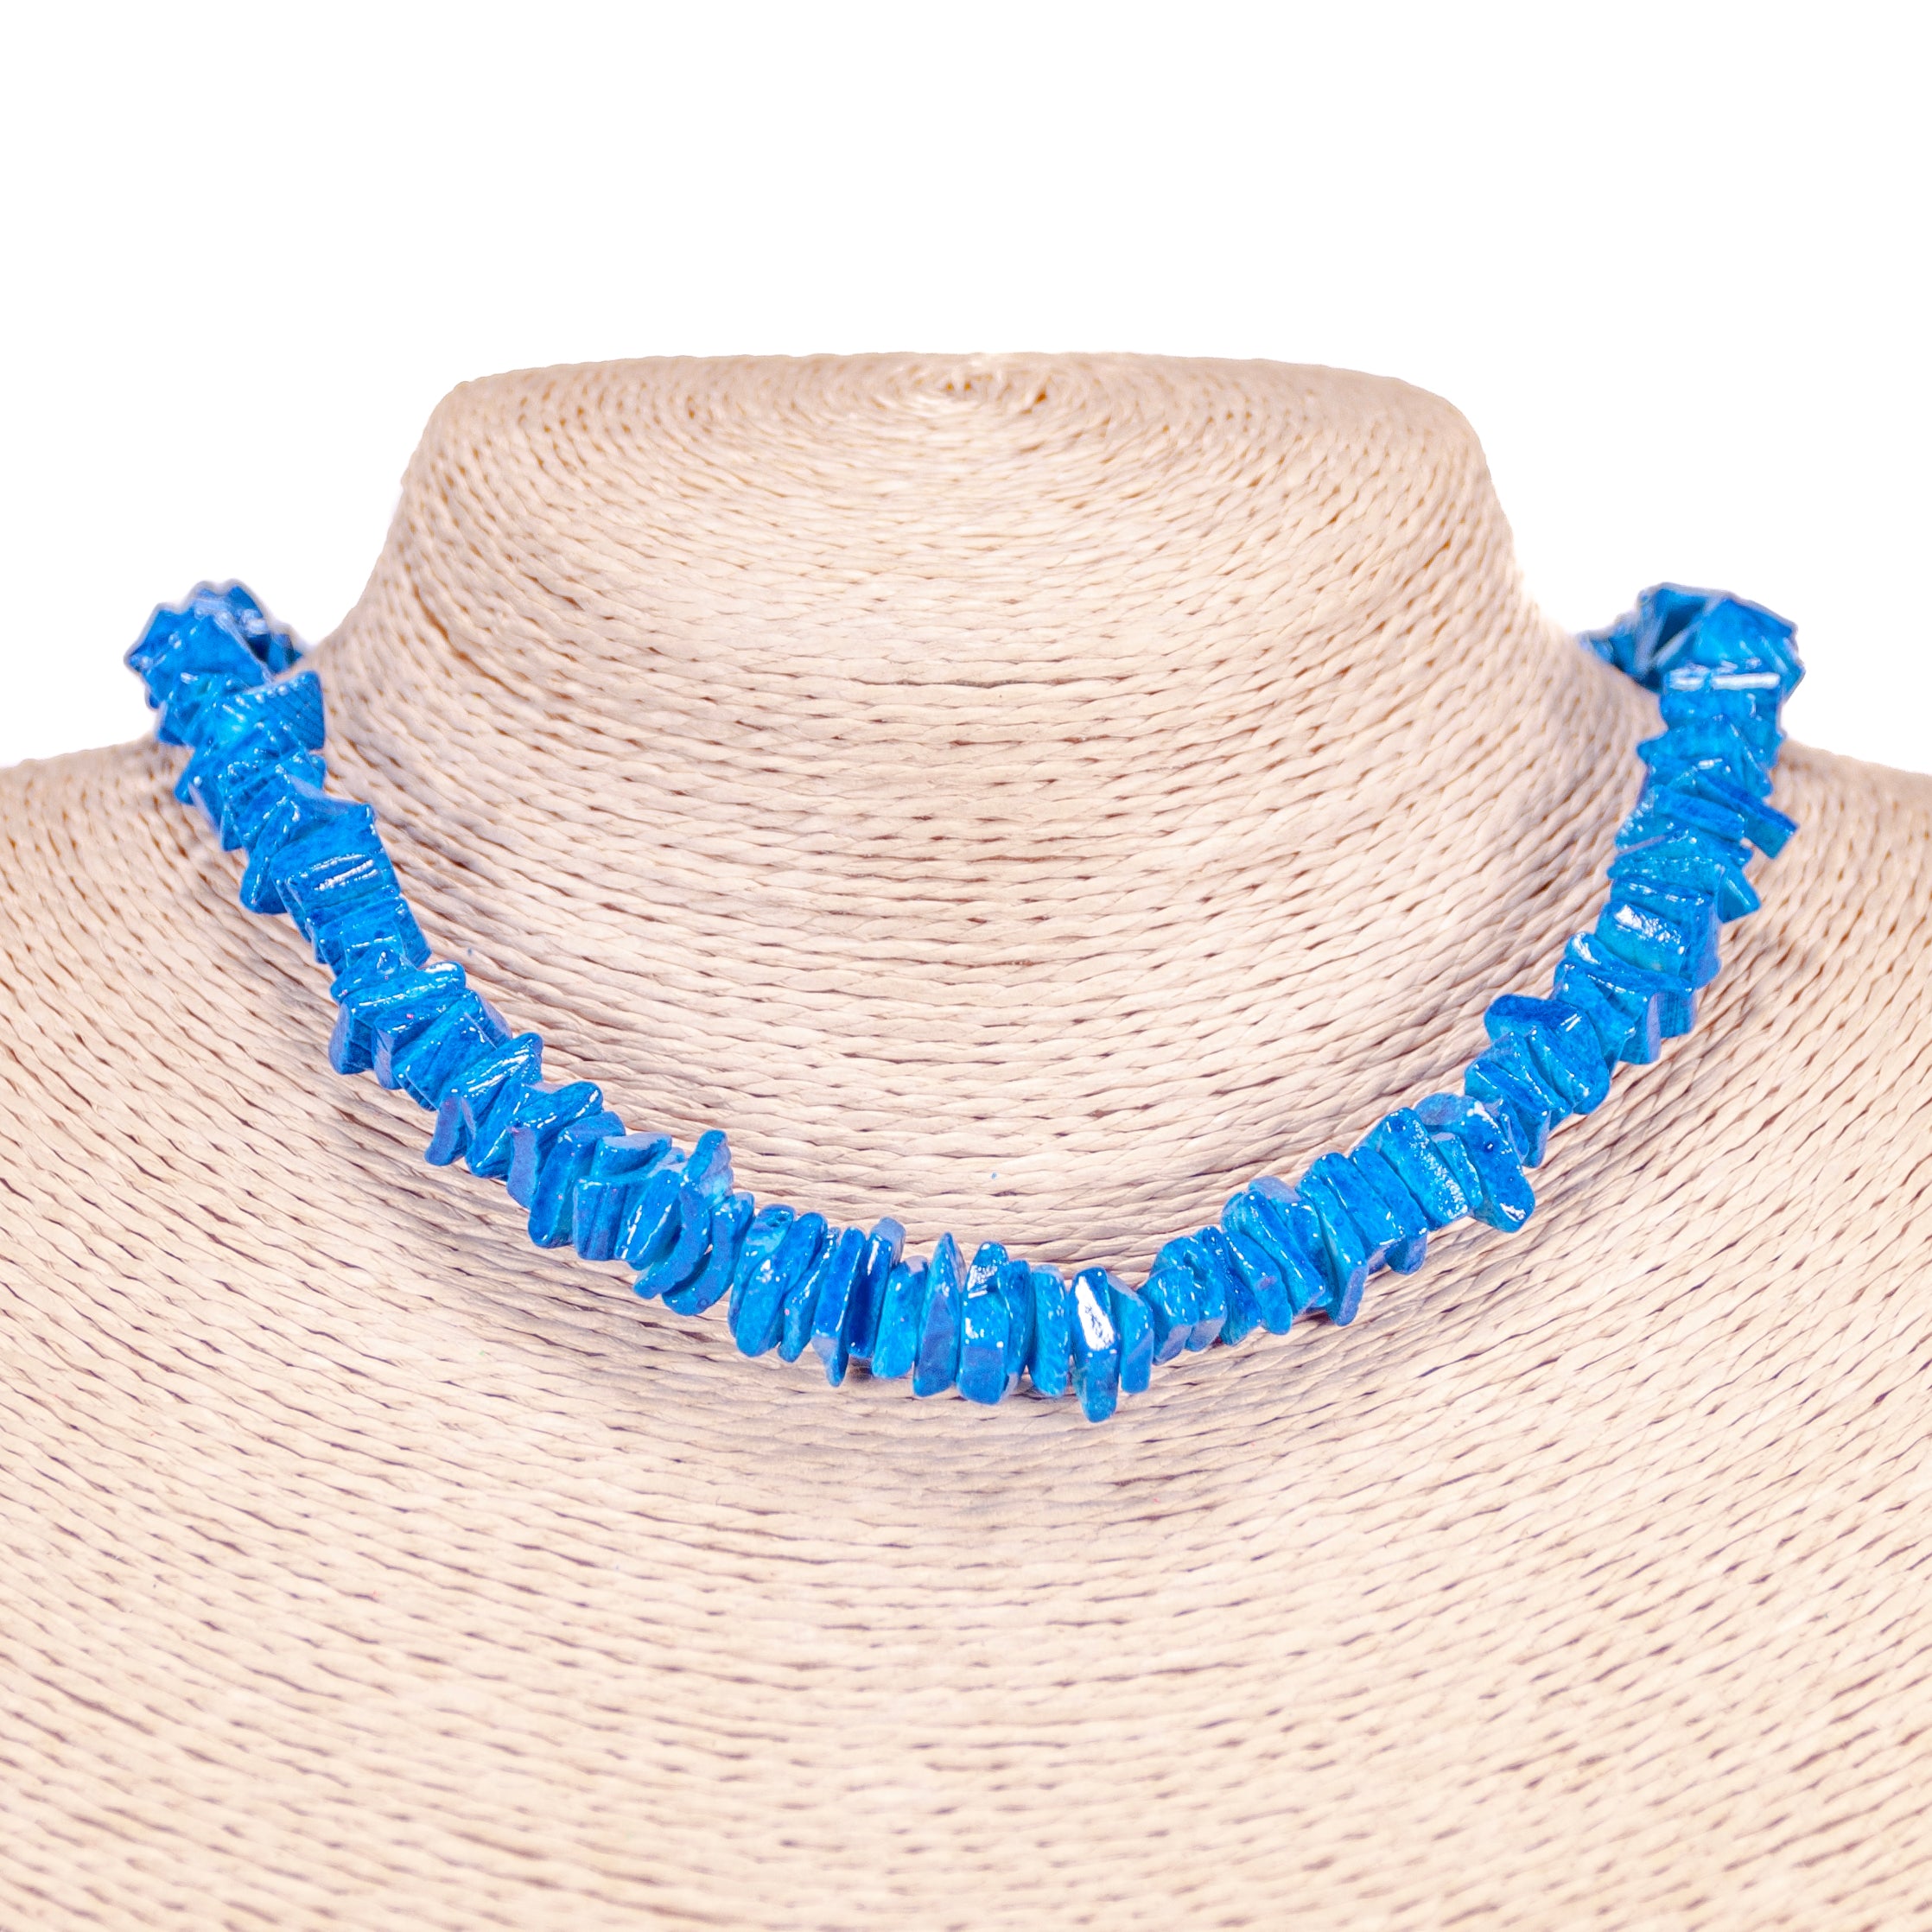 Dark Blue Puka Chip Shell Beads Necklace and Anklet Set